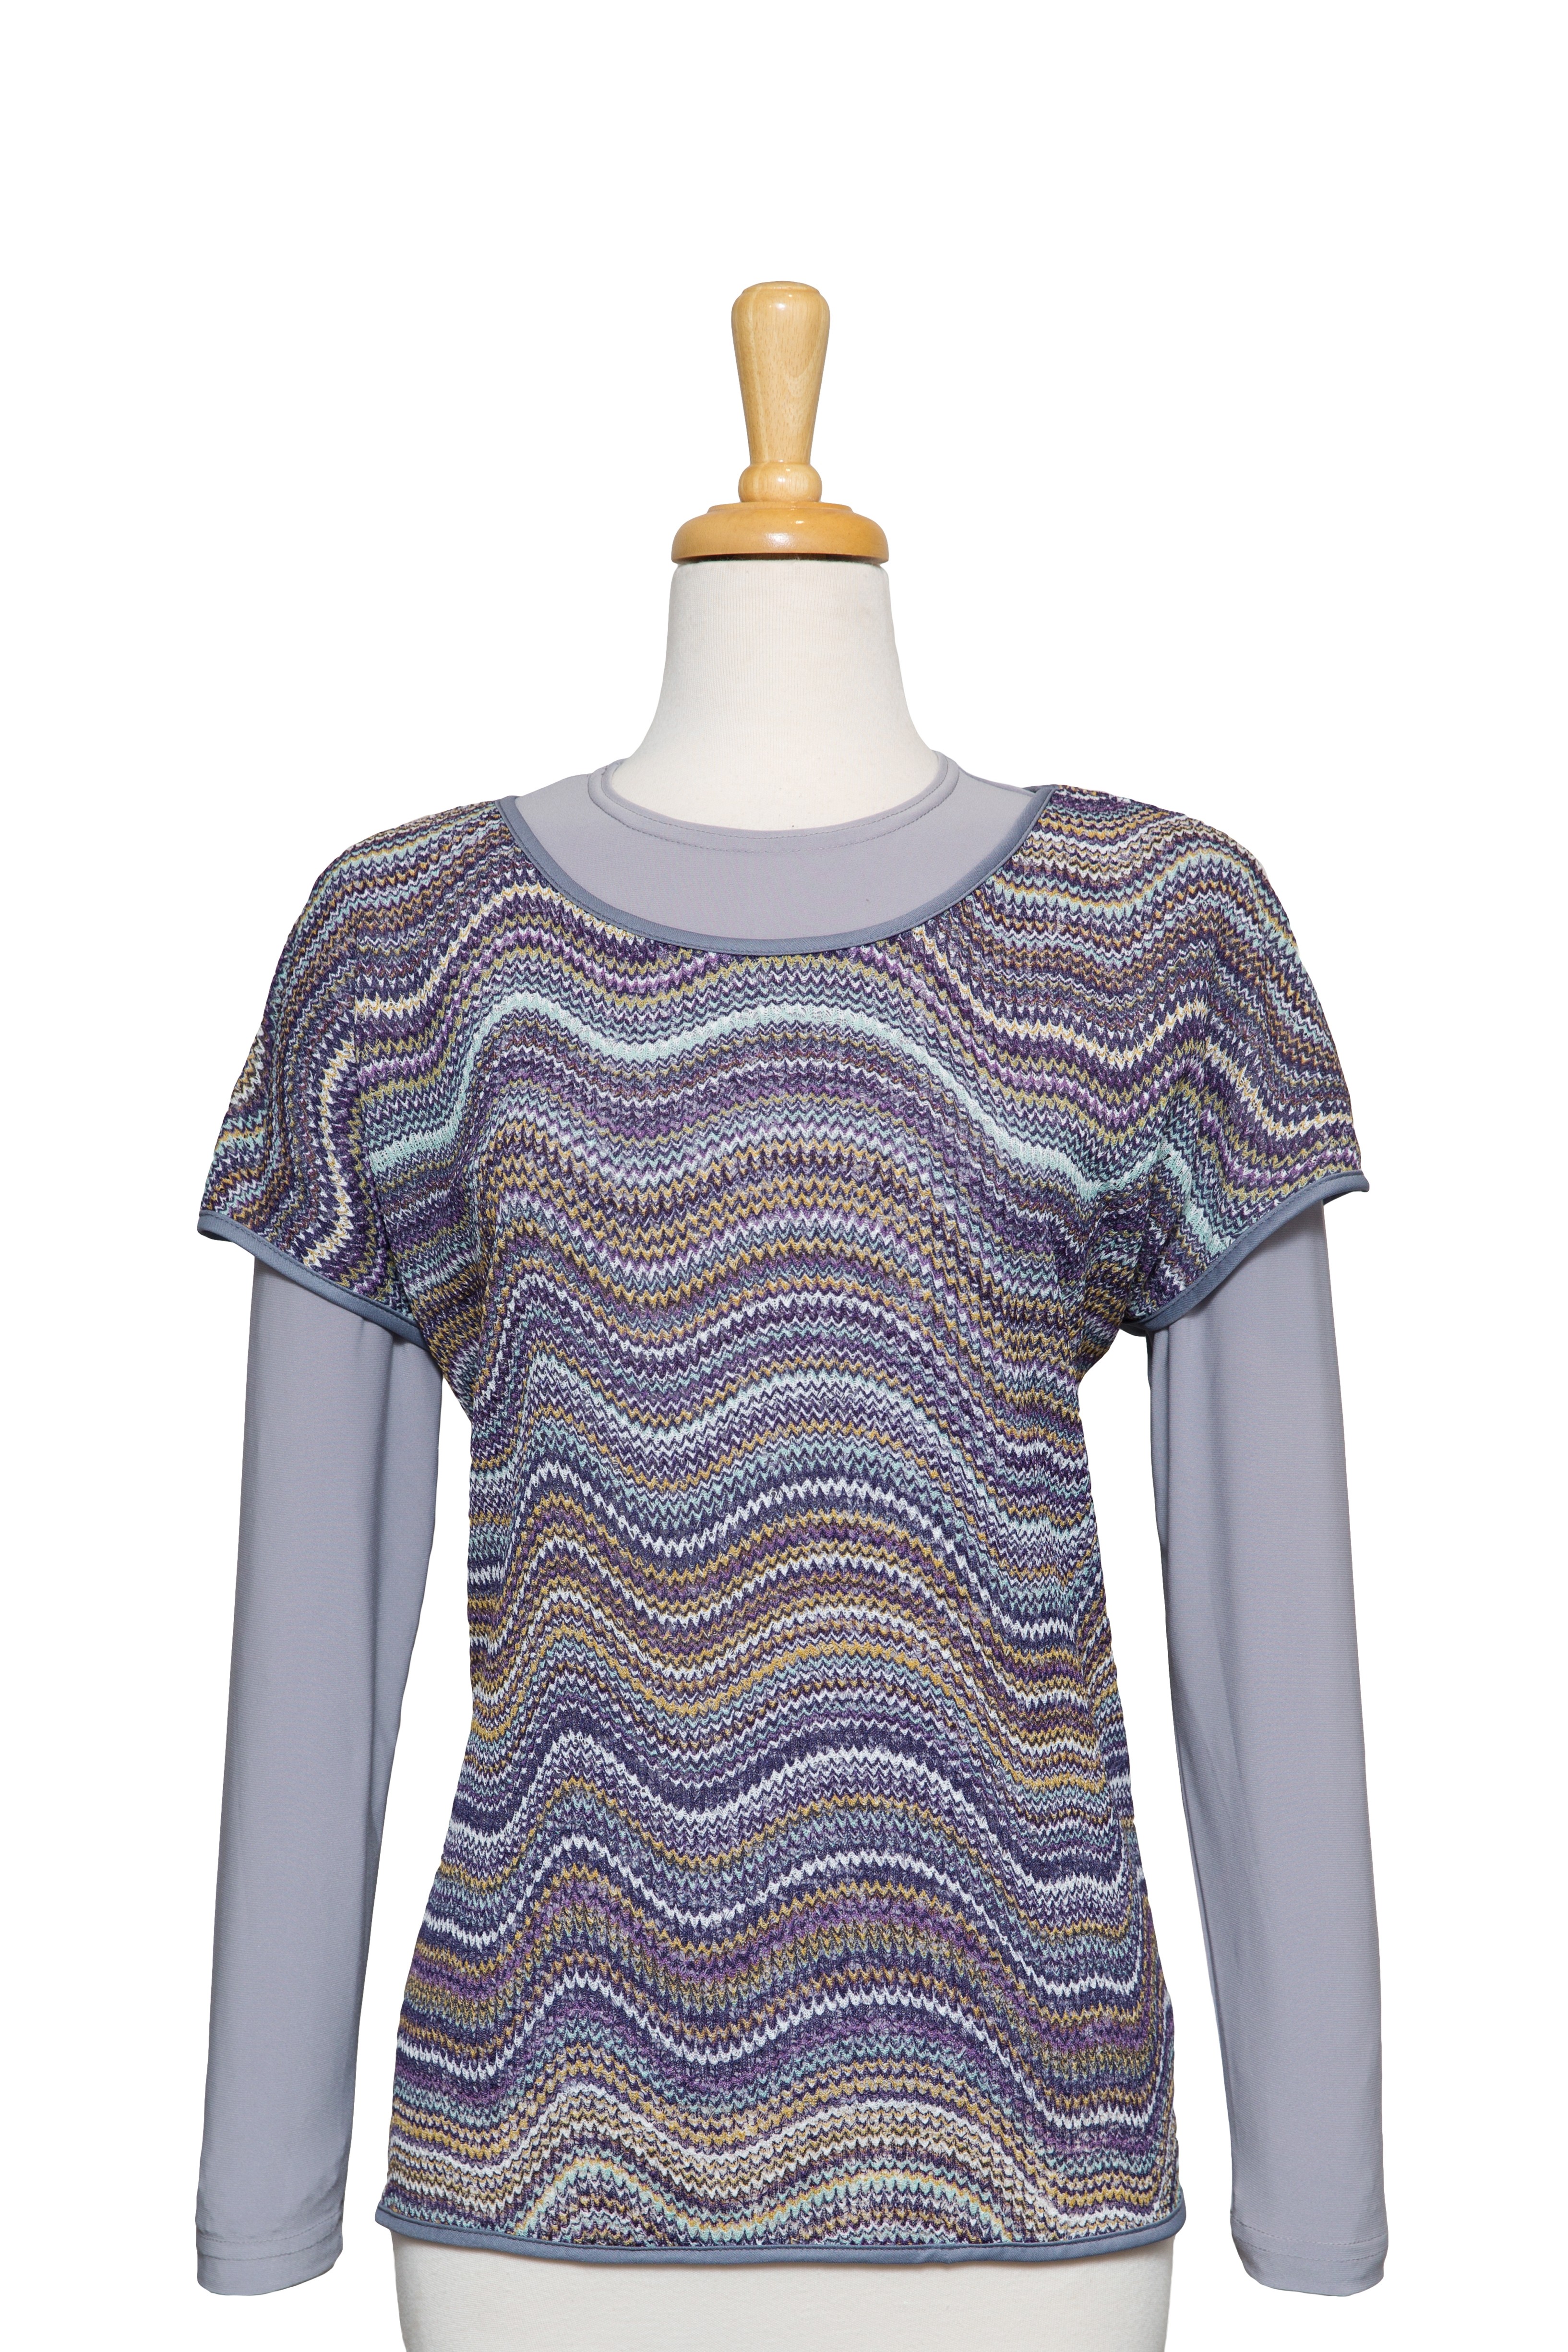 Shades of Grey and Purple Waves Crochet Short Sleeve With Grey Long Sleeve Microfiber Top